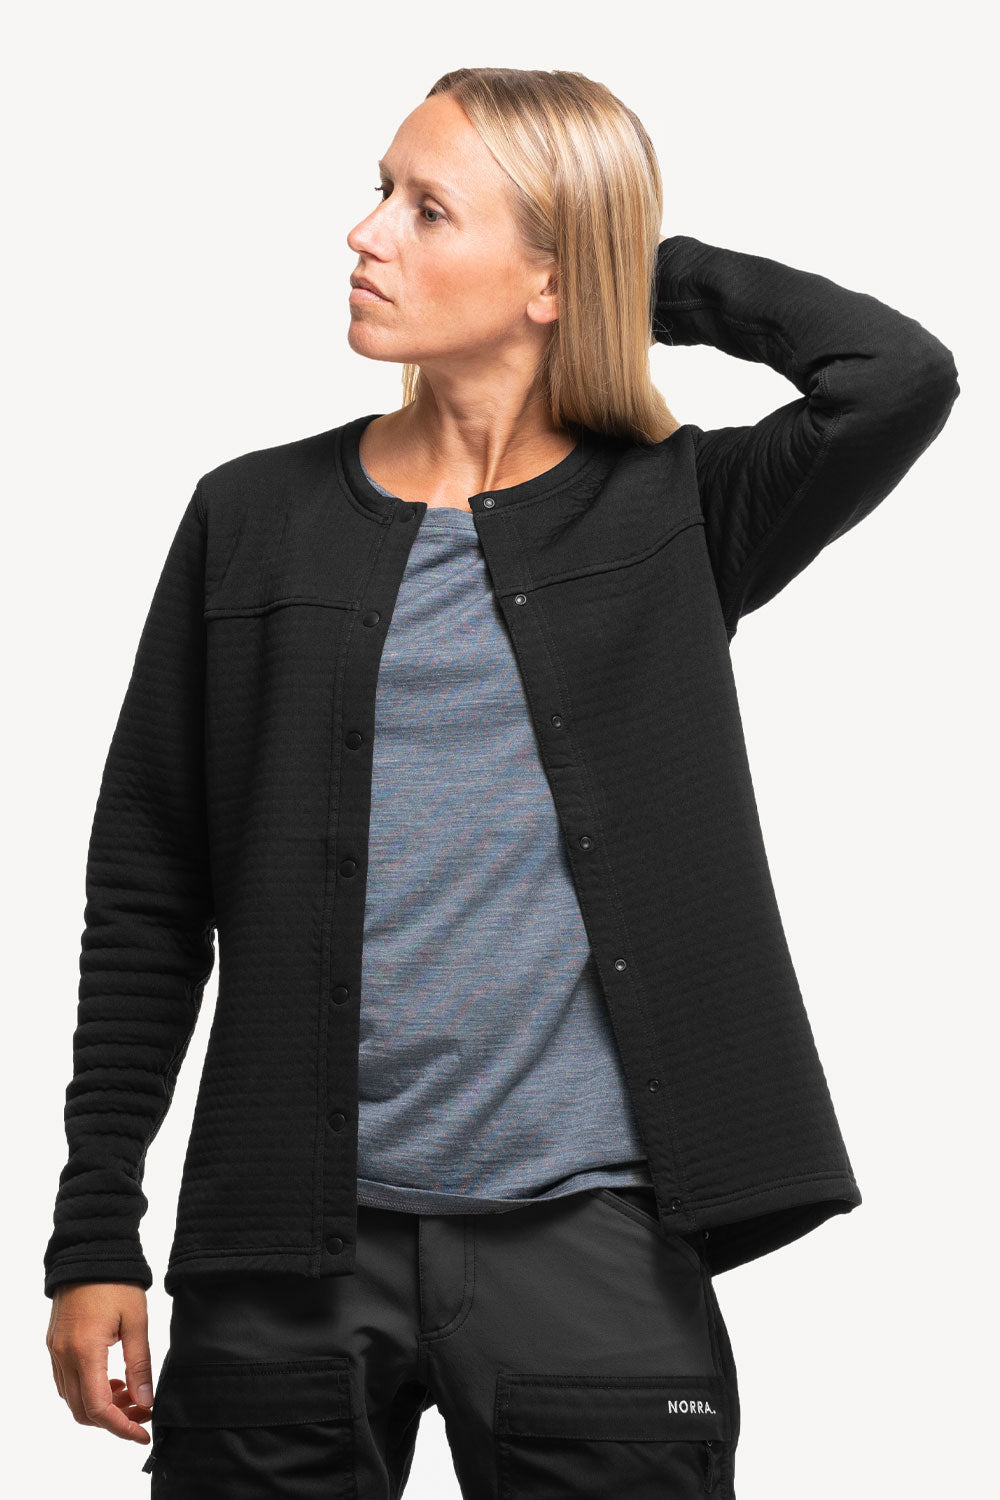 Women's all weather technical cardigan.